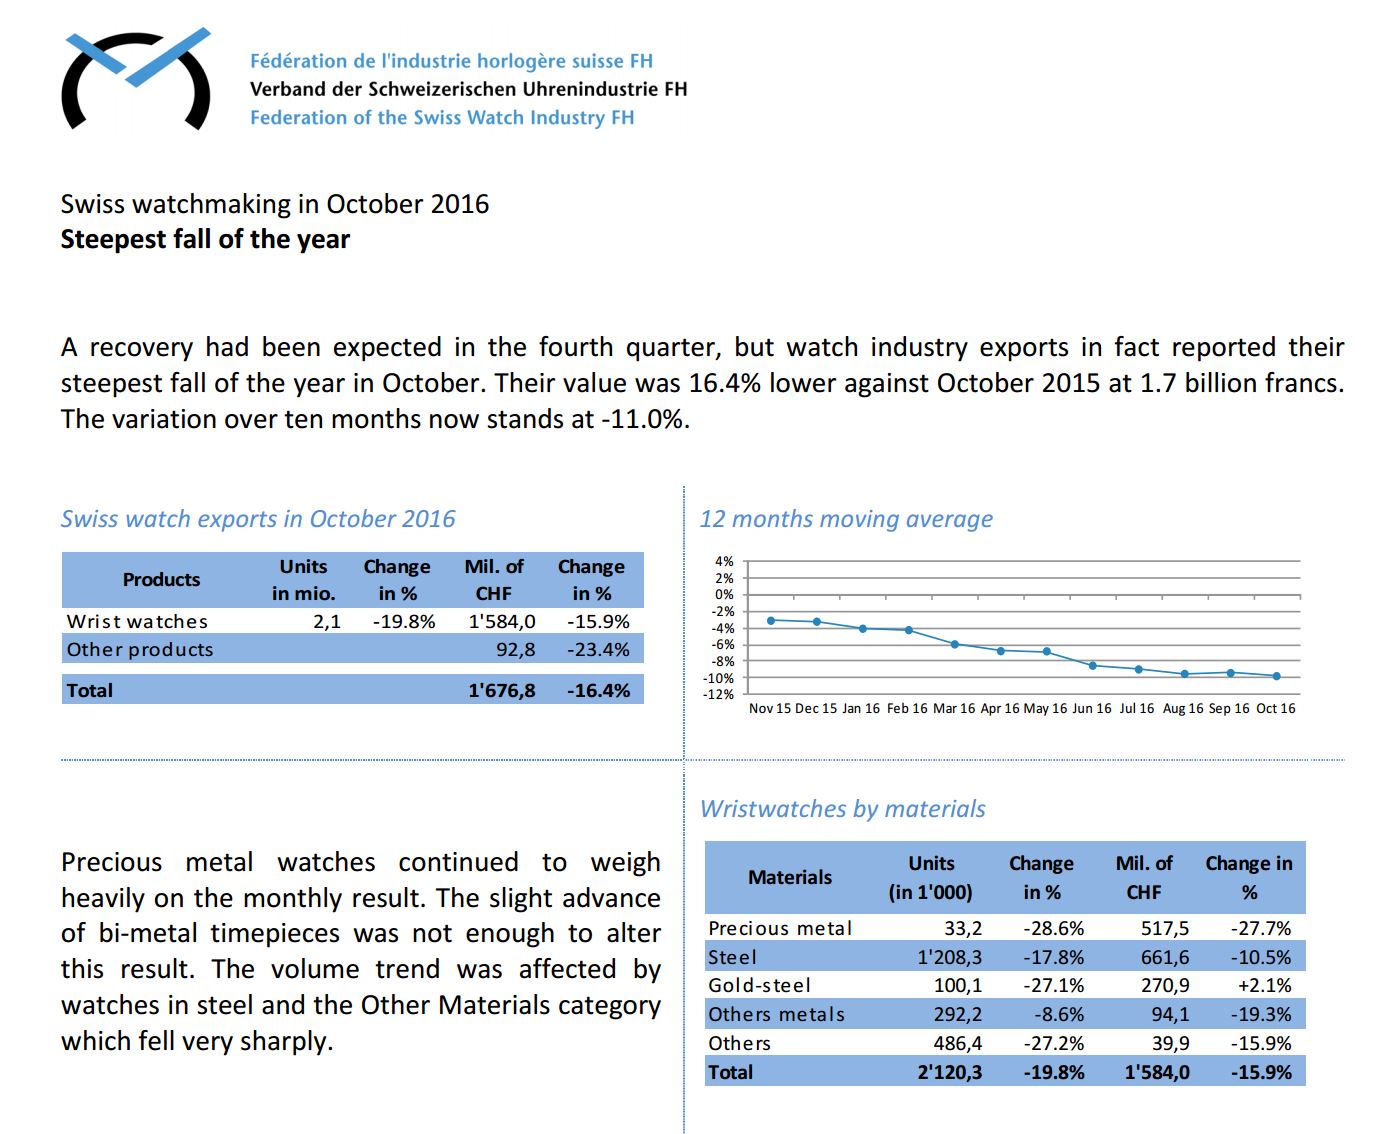 October Export Data (source: http://www.fhs.swiss/file/59/comm_161010_a.pdf)